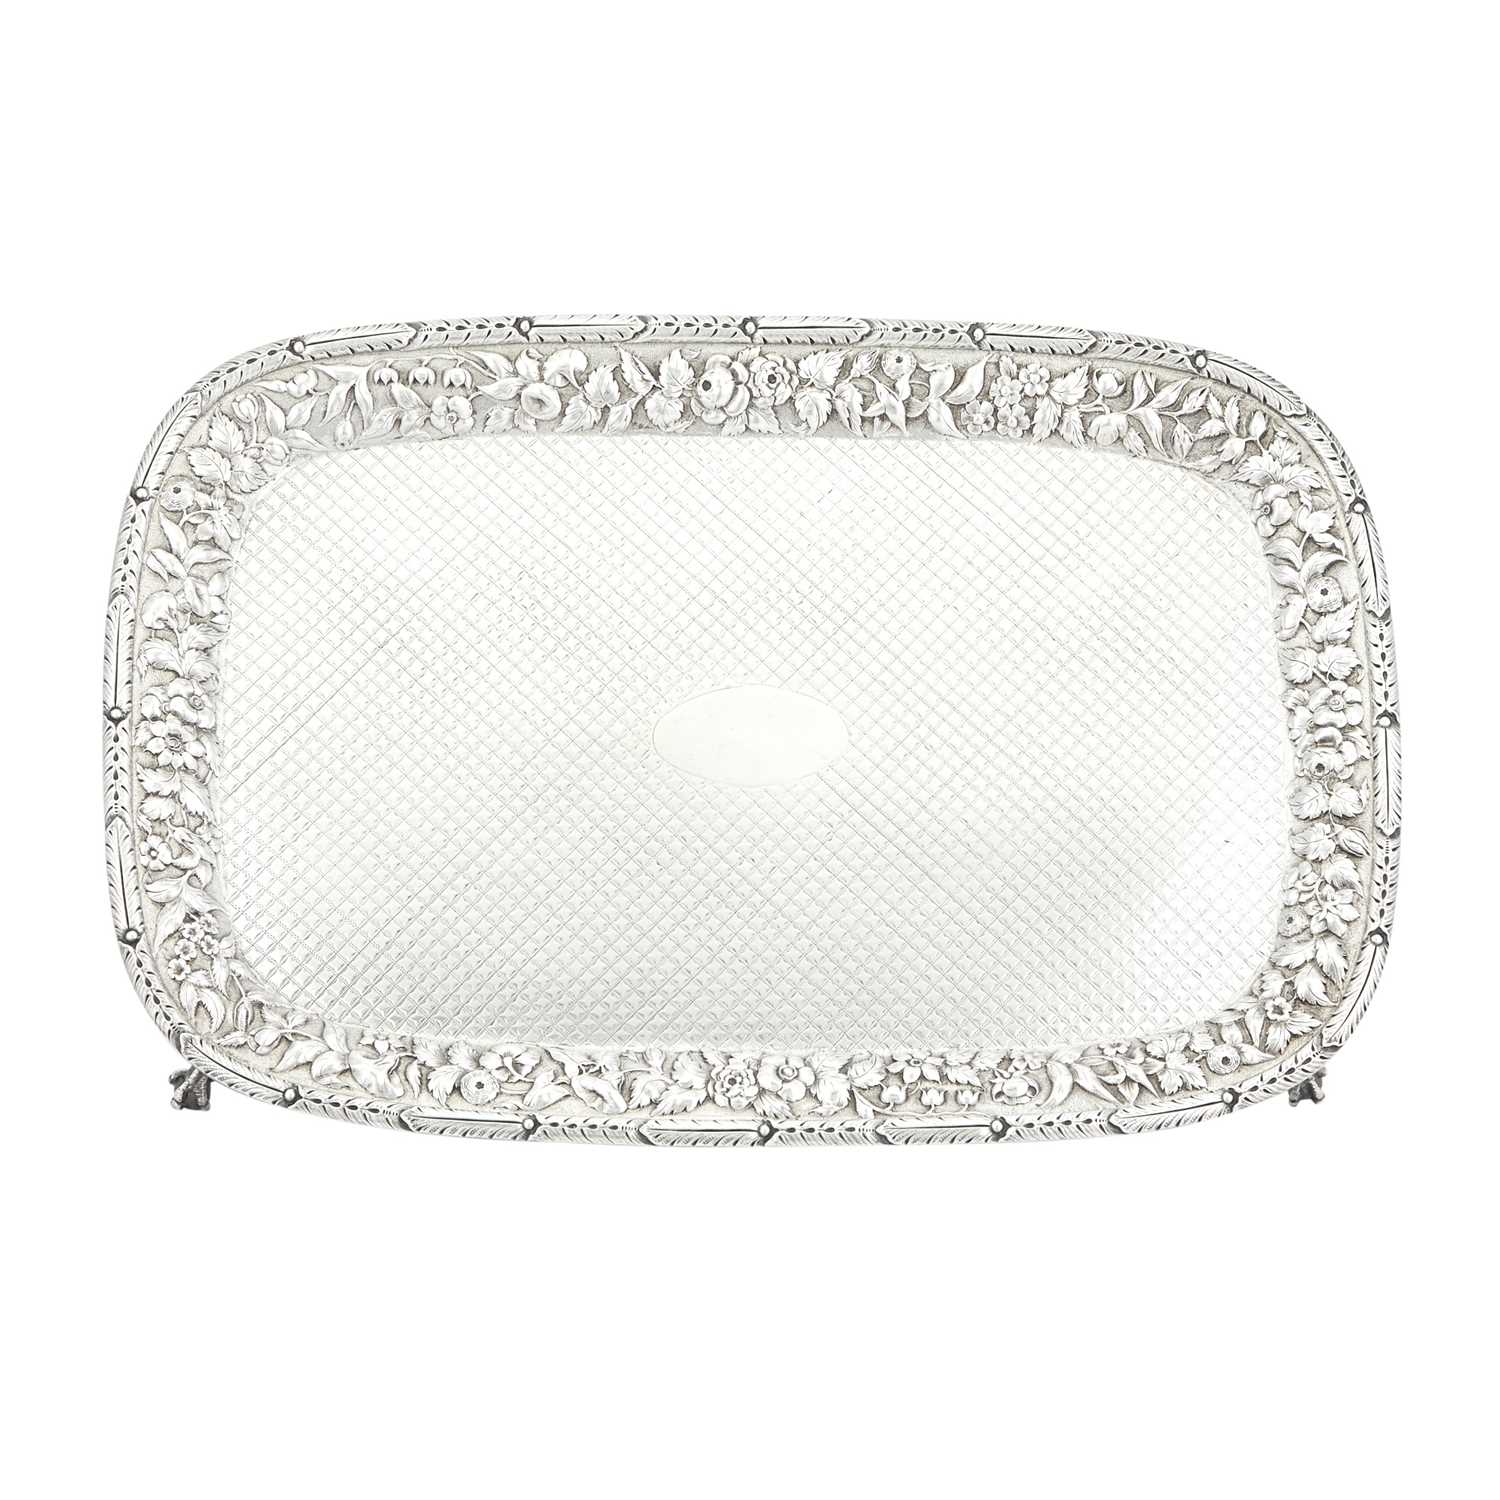 Lot 152 - S. Kirk & Son Sterling Silver Tray